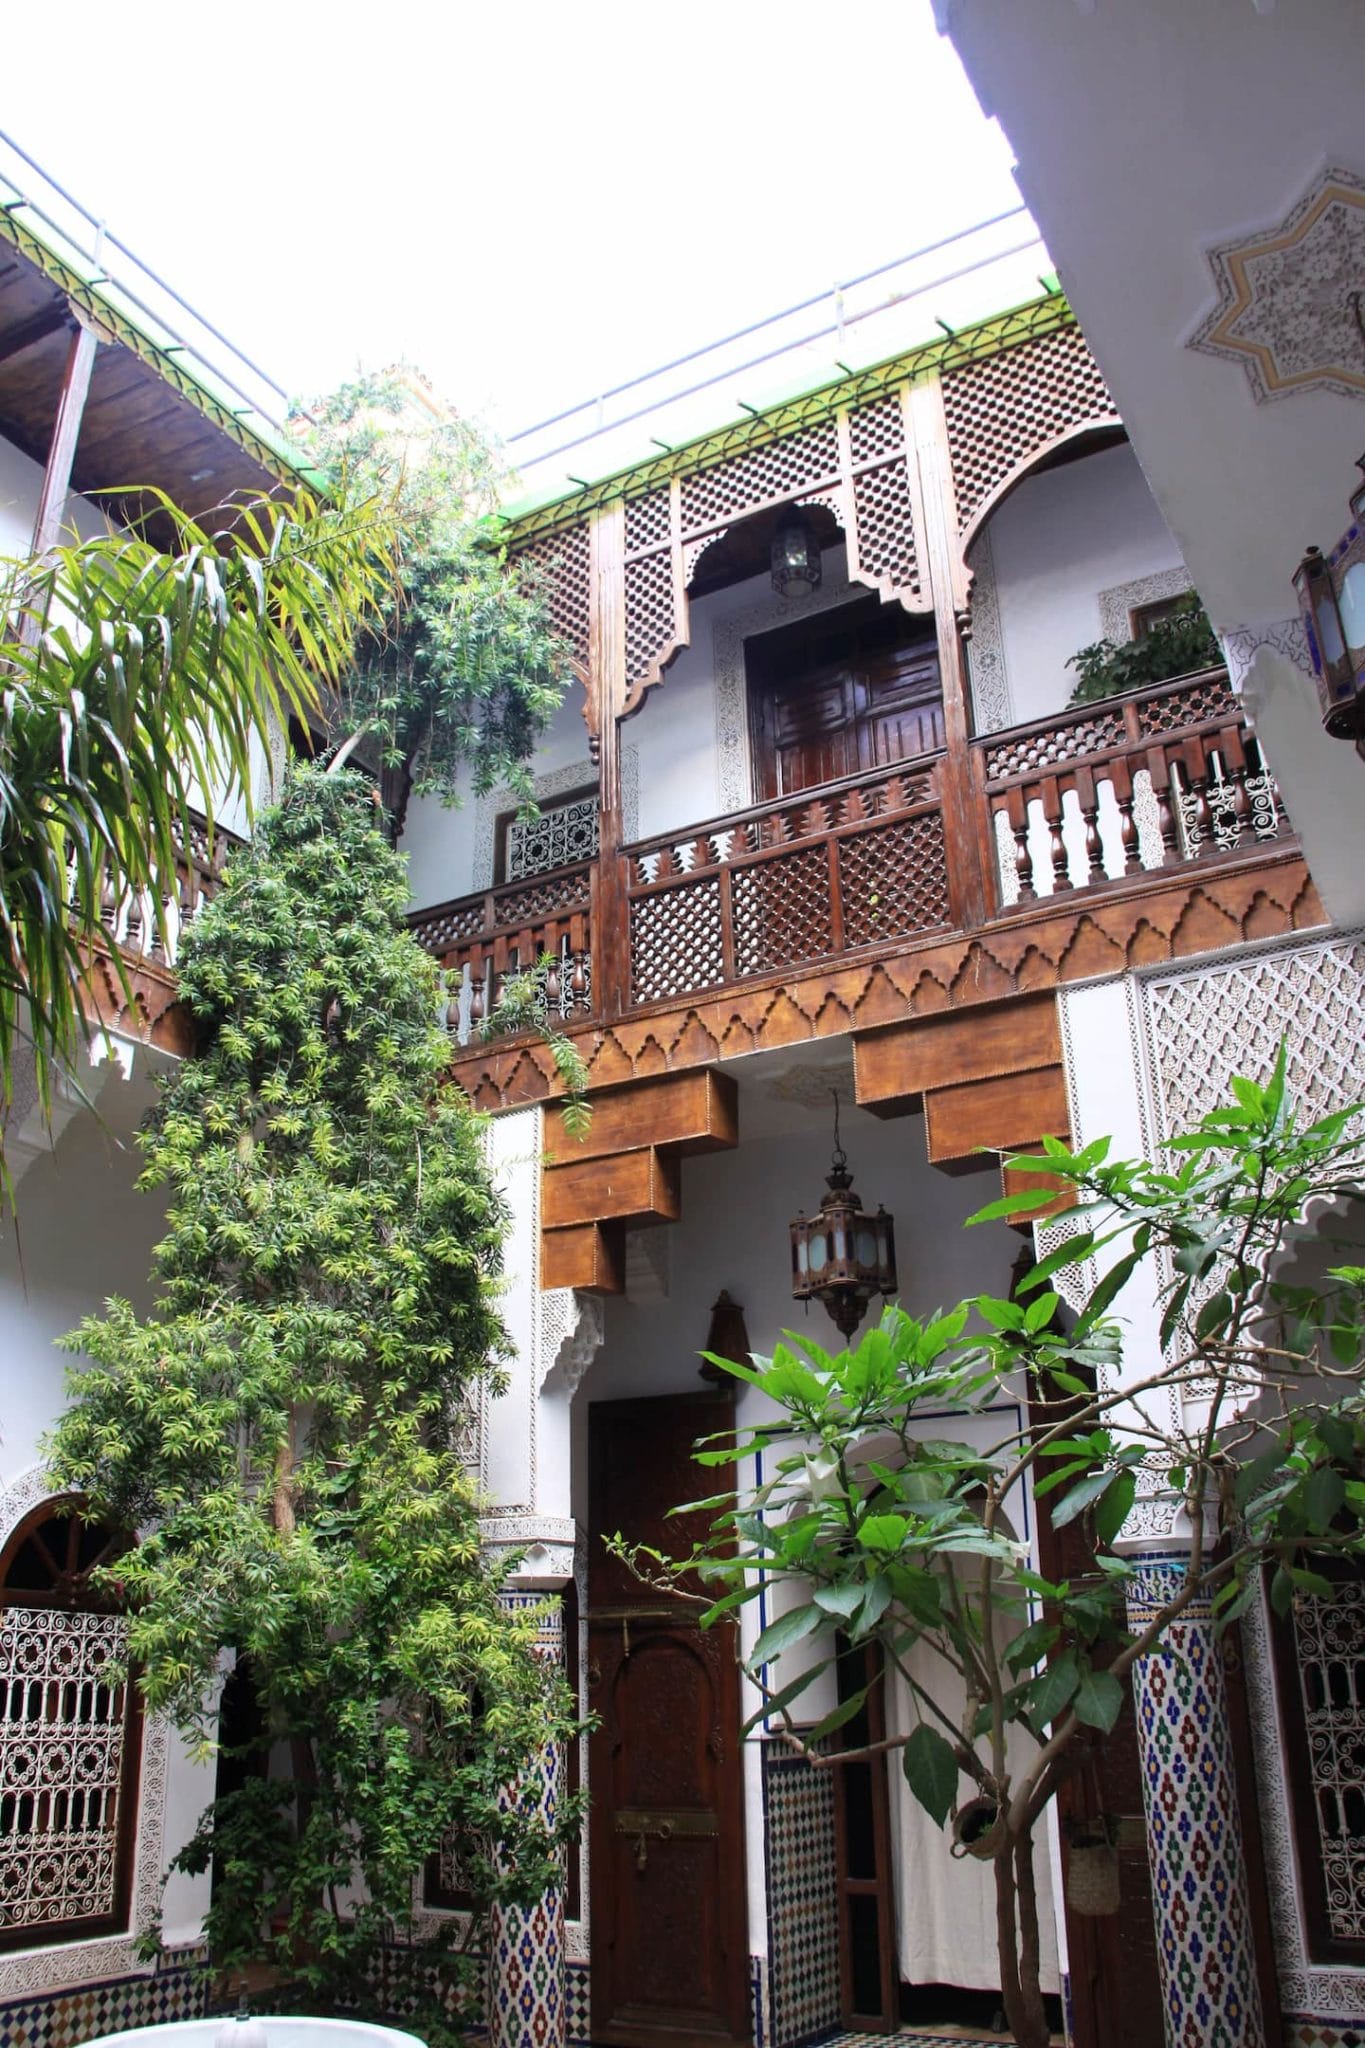 You are currently viewing Airbnb à Marrakech : 11 riads ou appartements superbes à louer